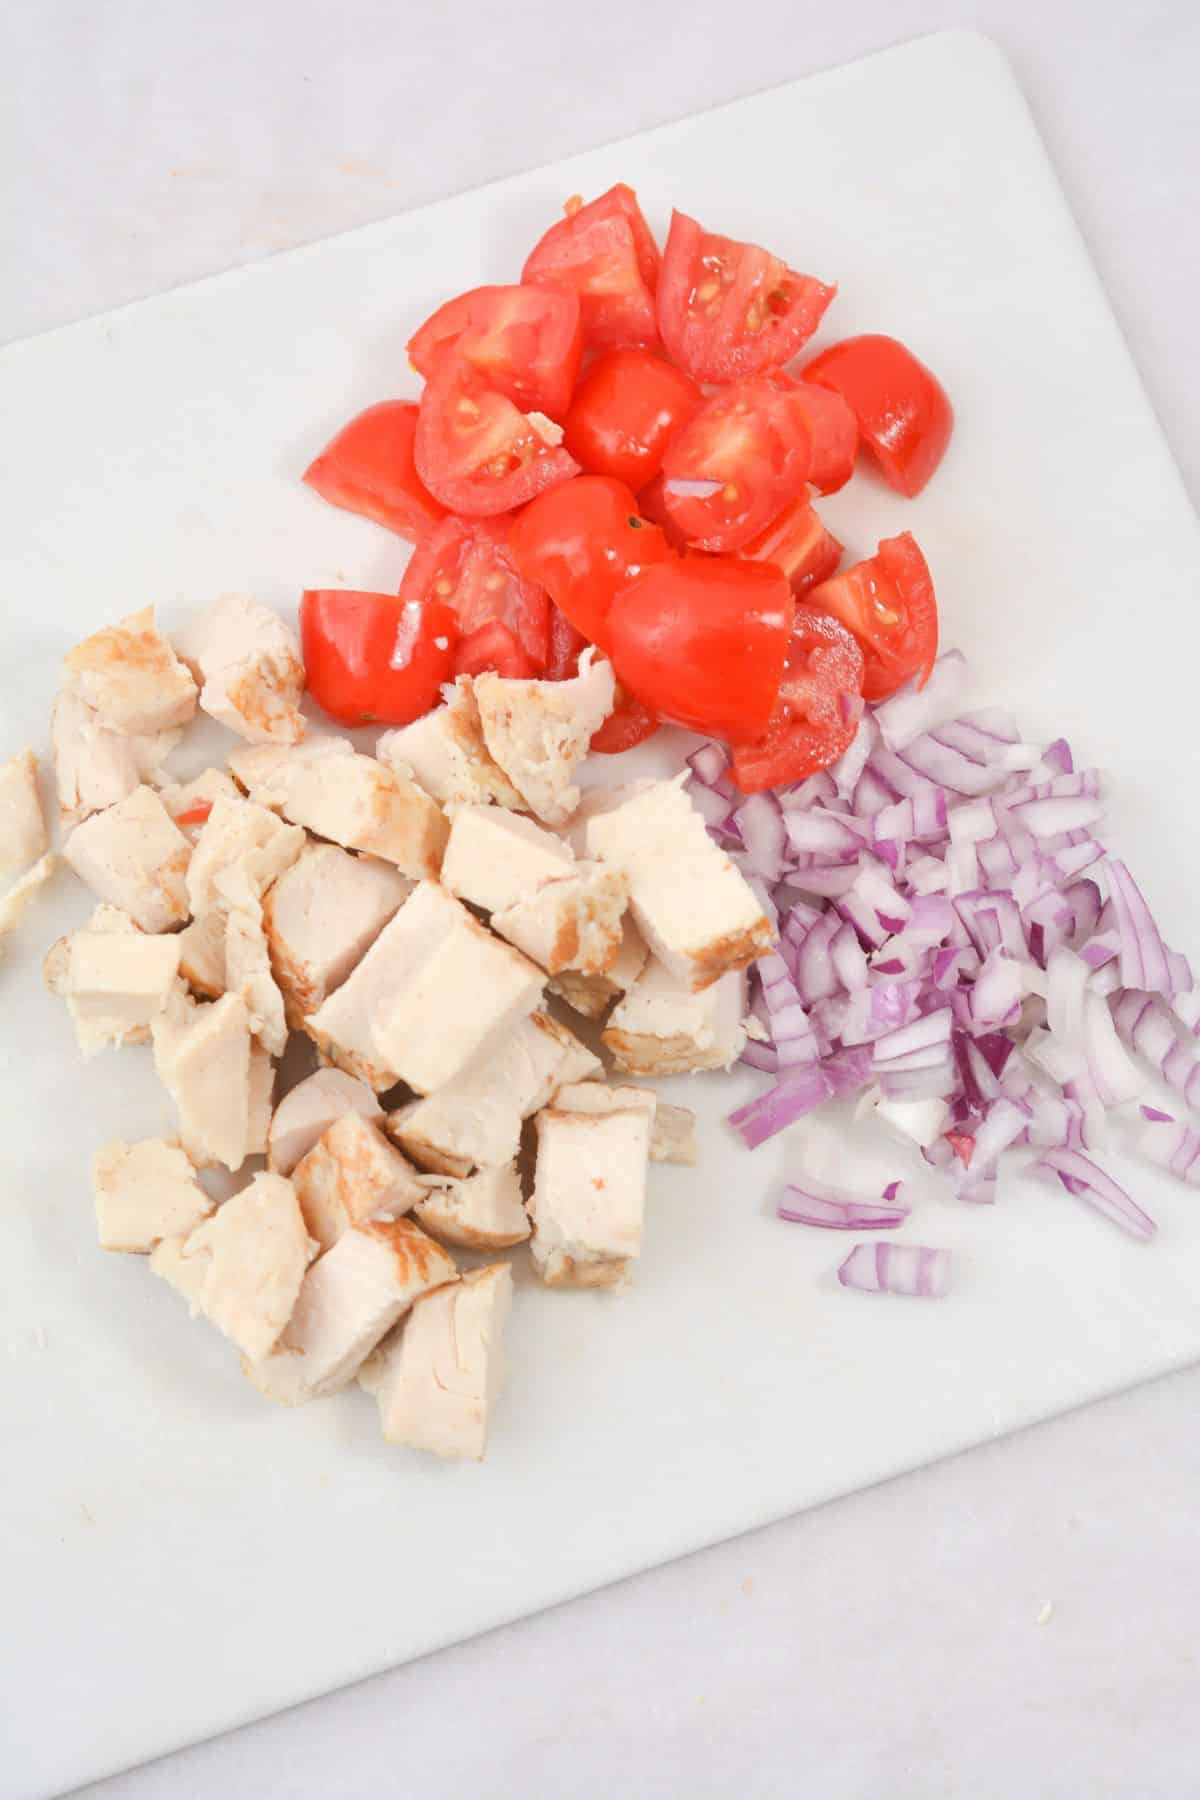 Chicken, tomatoes, onions